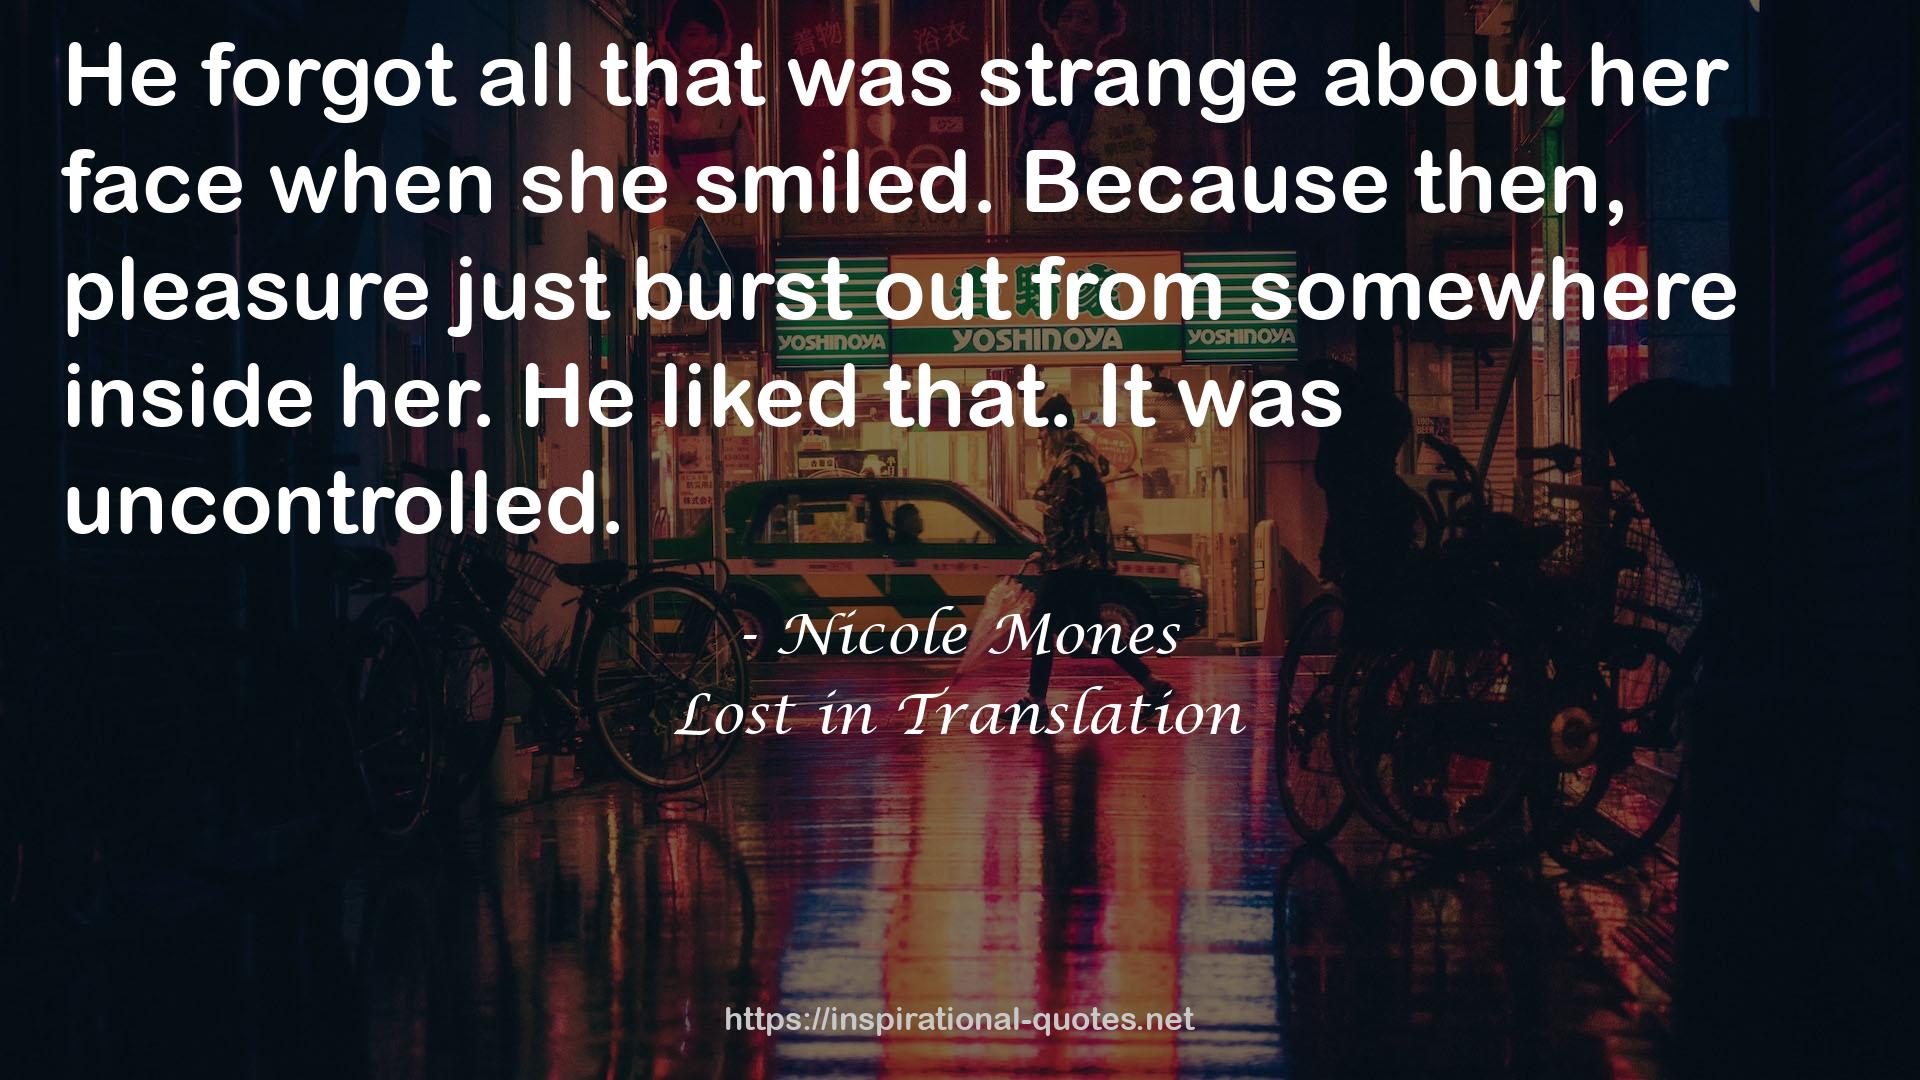 Lost in Translation QUOTES